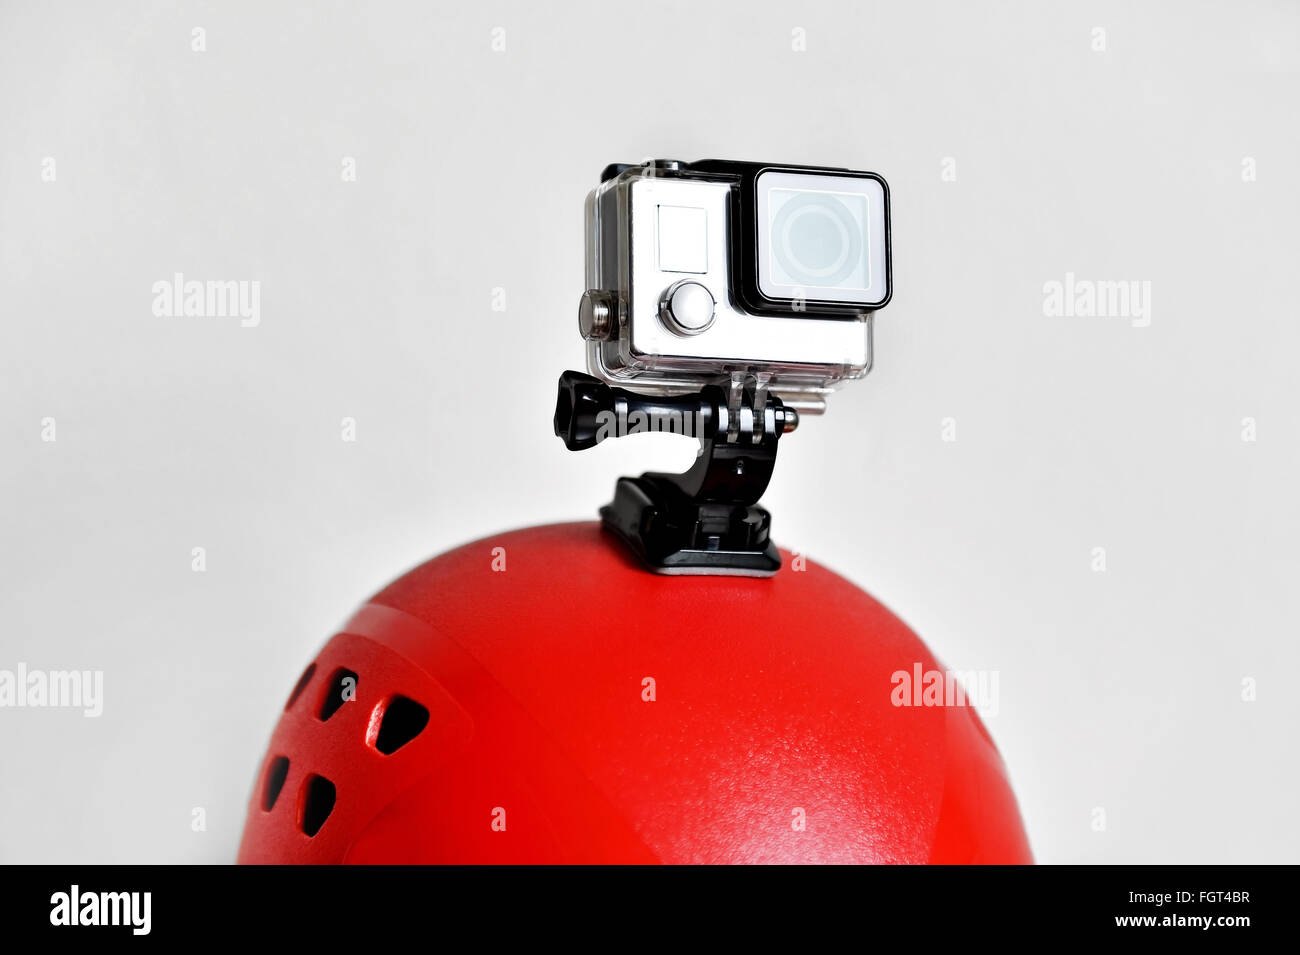 Detail shot with action camera mounted on a red sports helmet Stock Photo